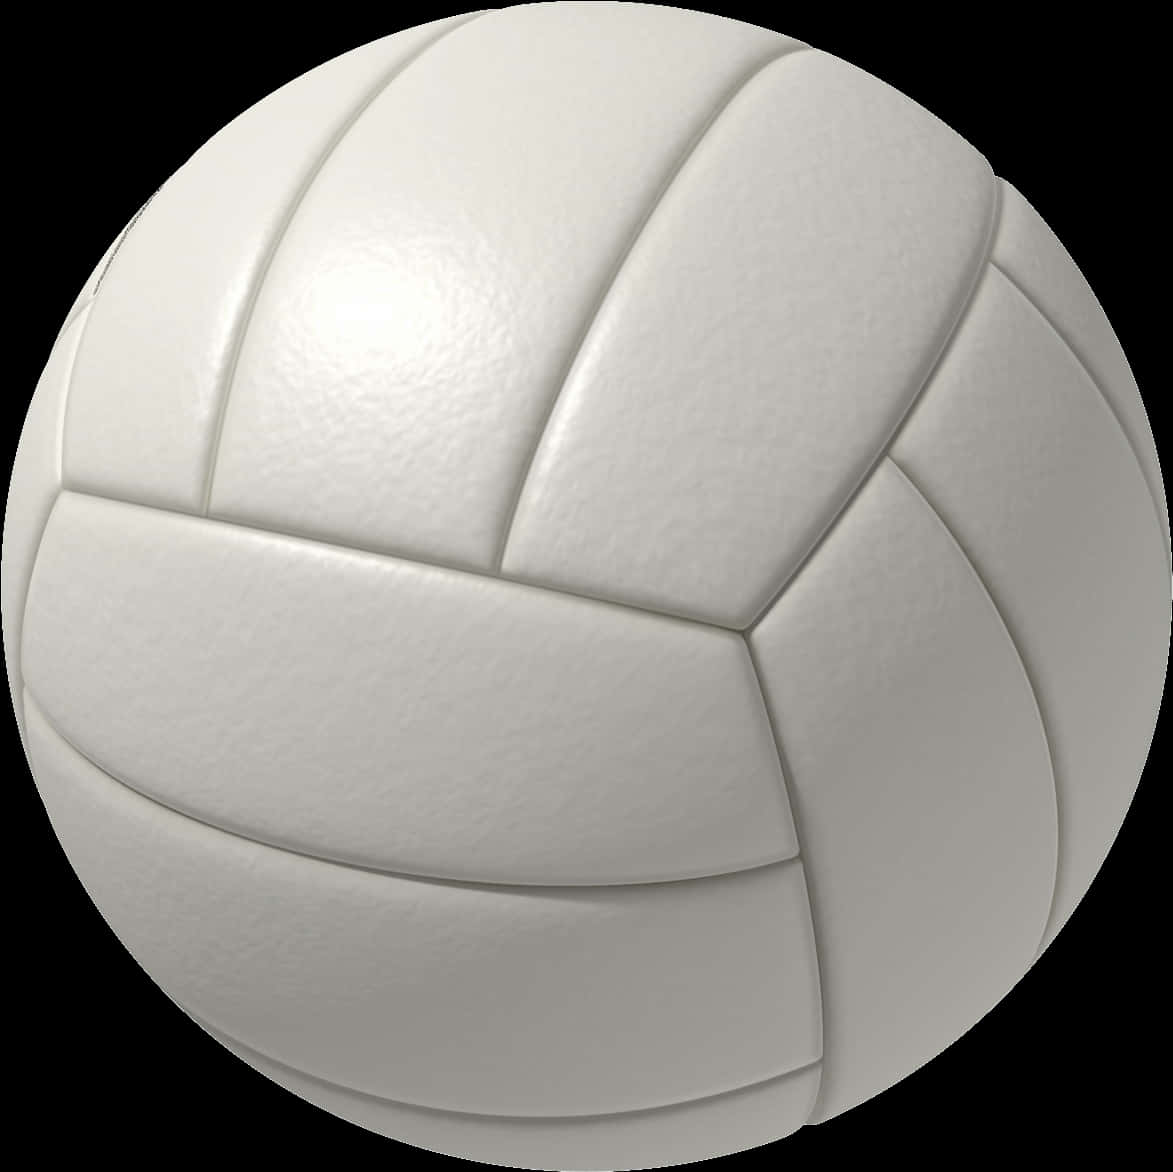 Volleyball Isolatedon Black Background PNG image